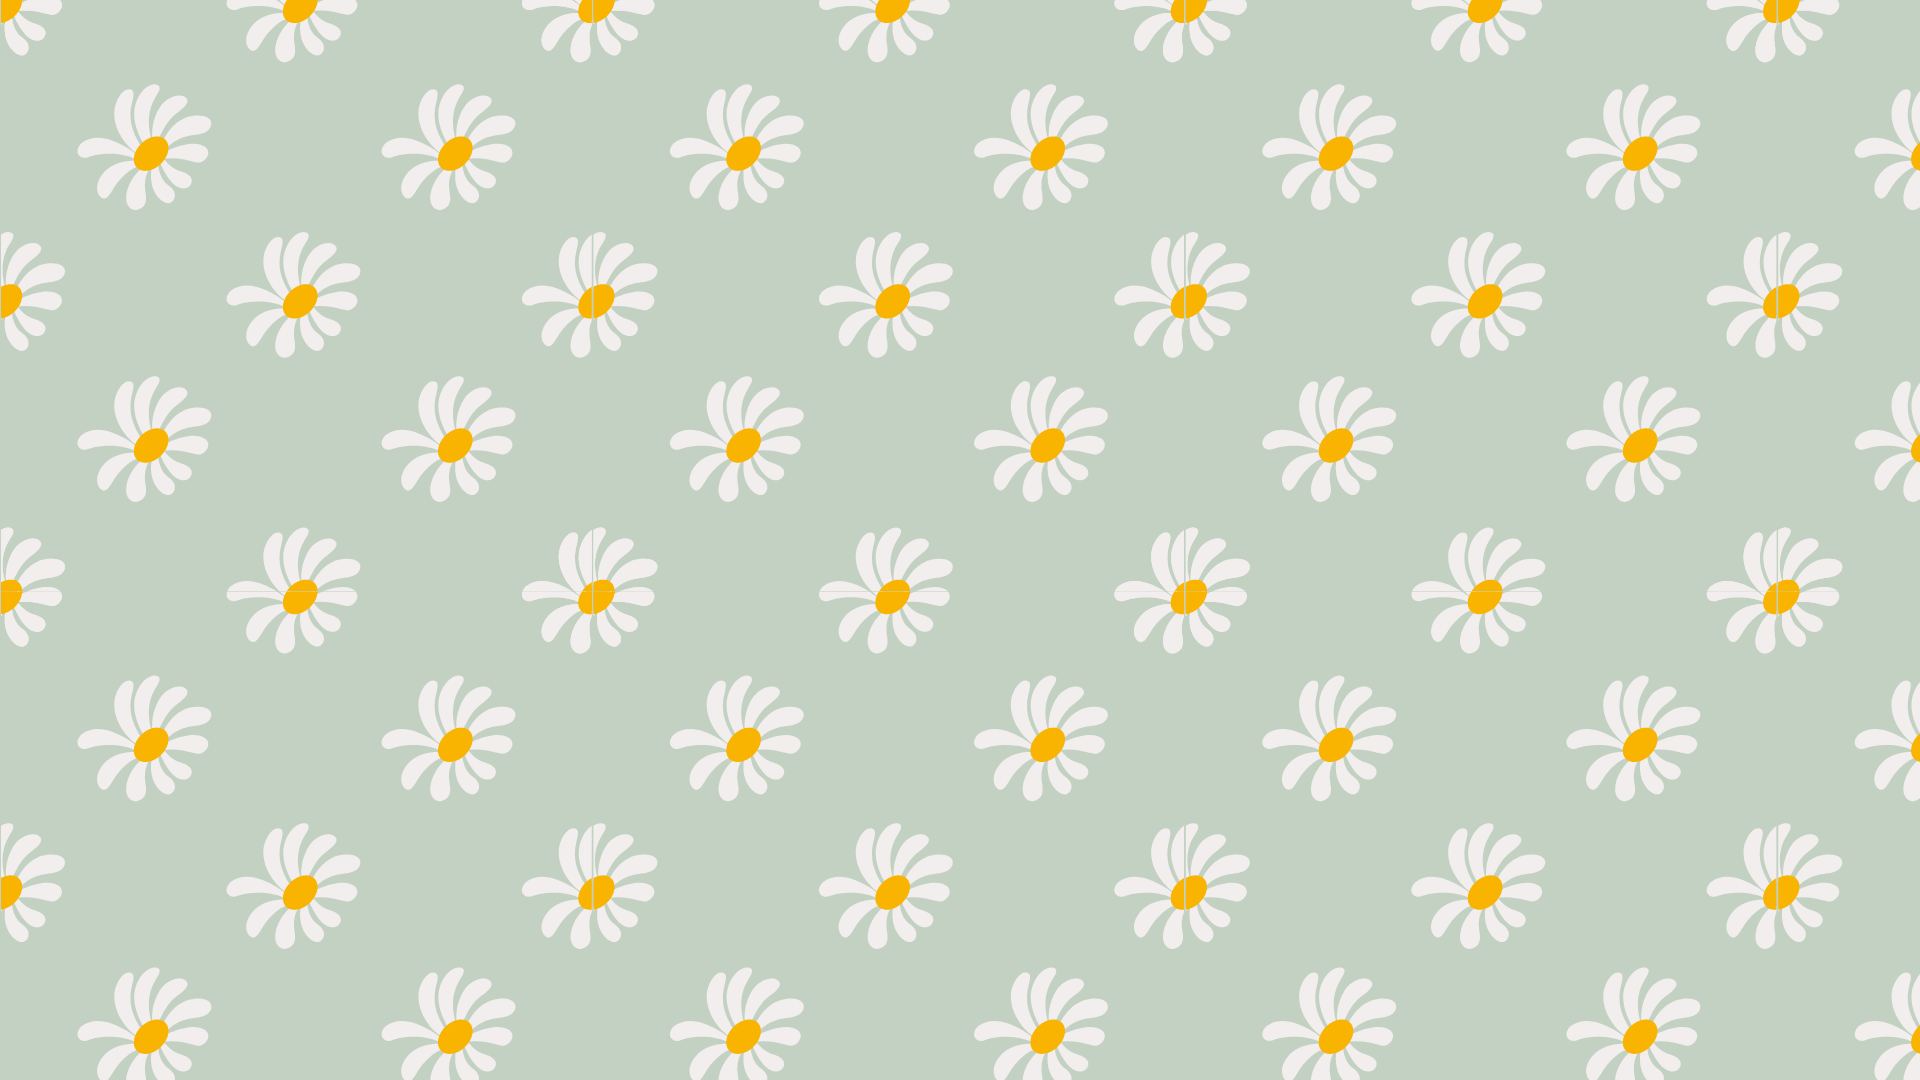 Sage Green Aesthetic Wallpaper Background (FREE)